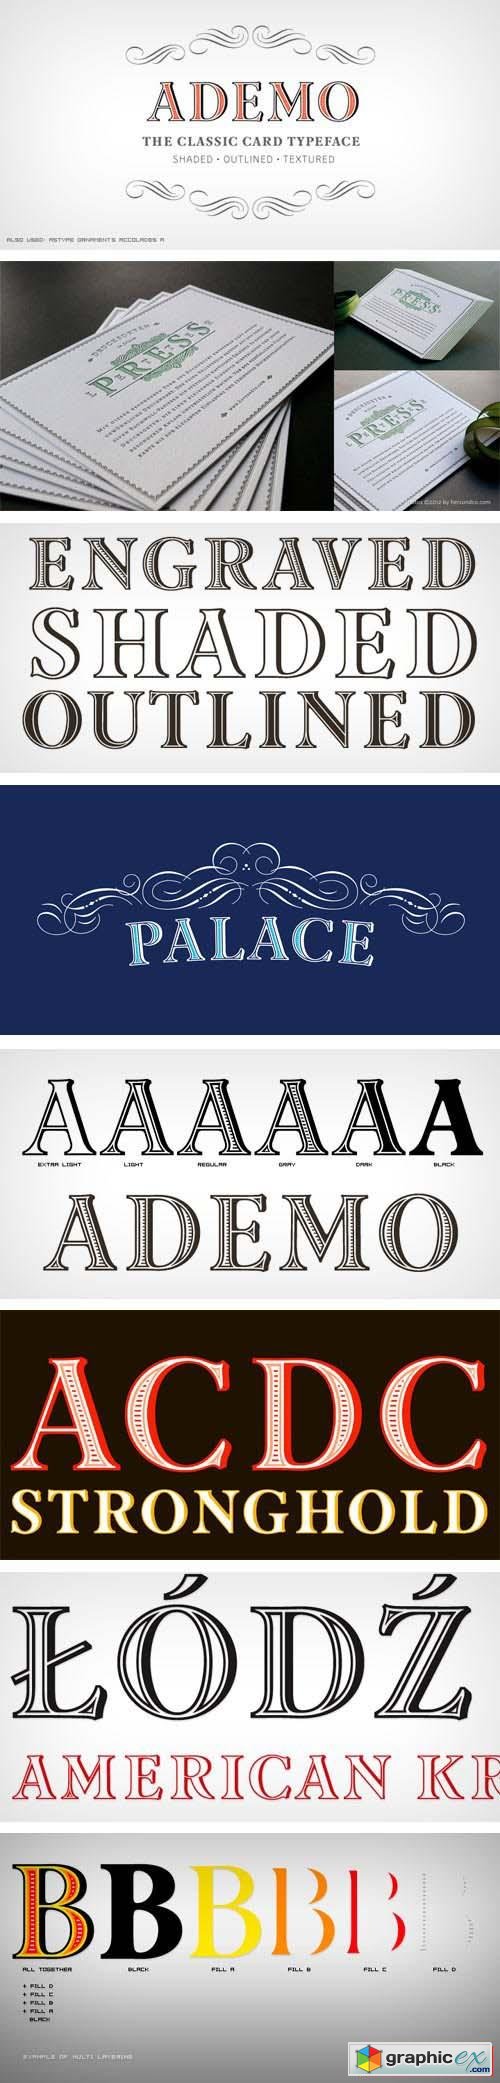 Ademo Font Family - 14 Fonts $280